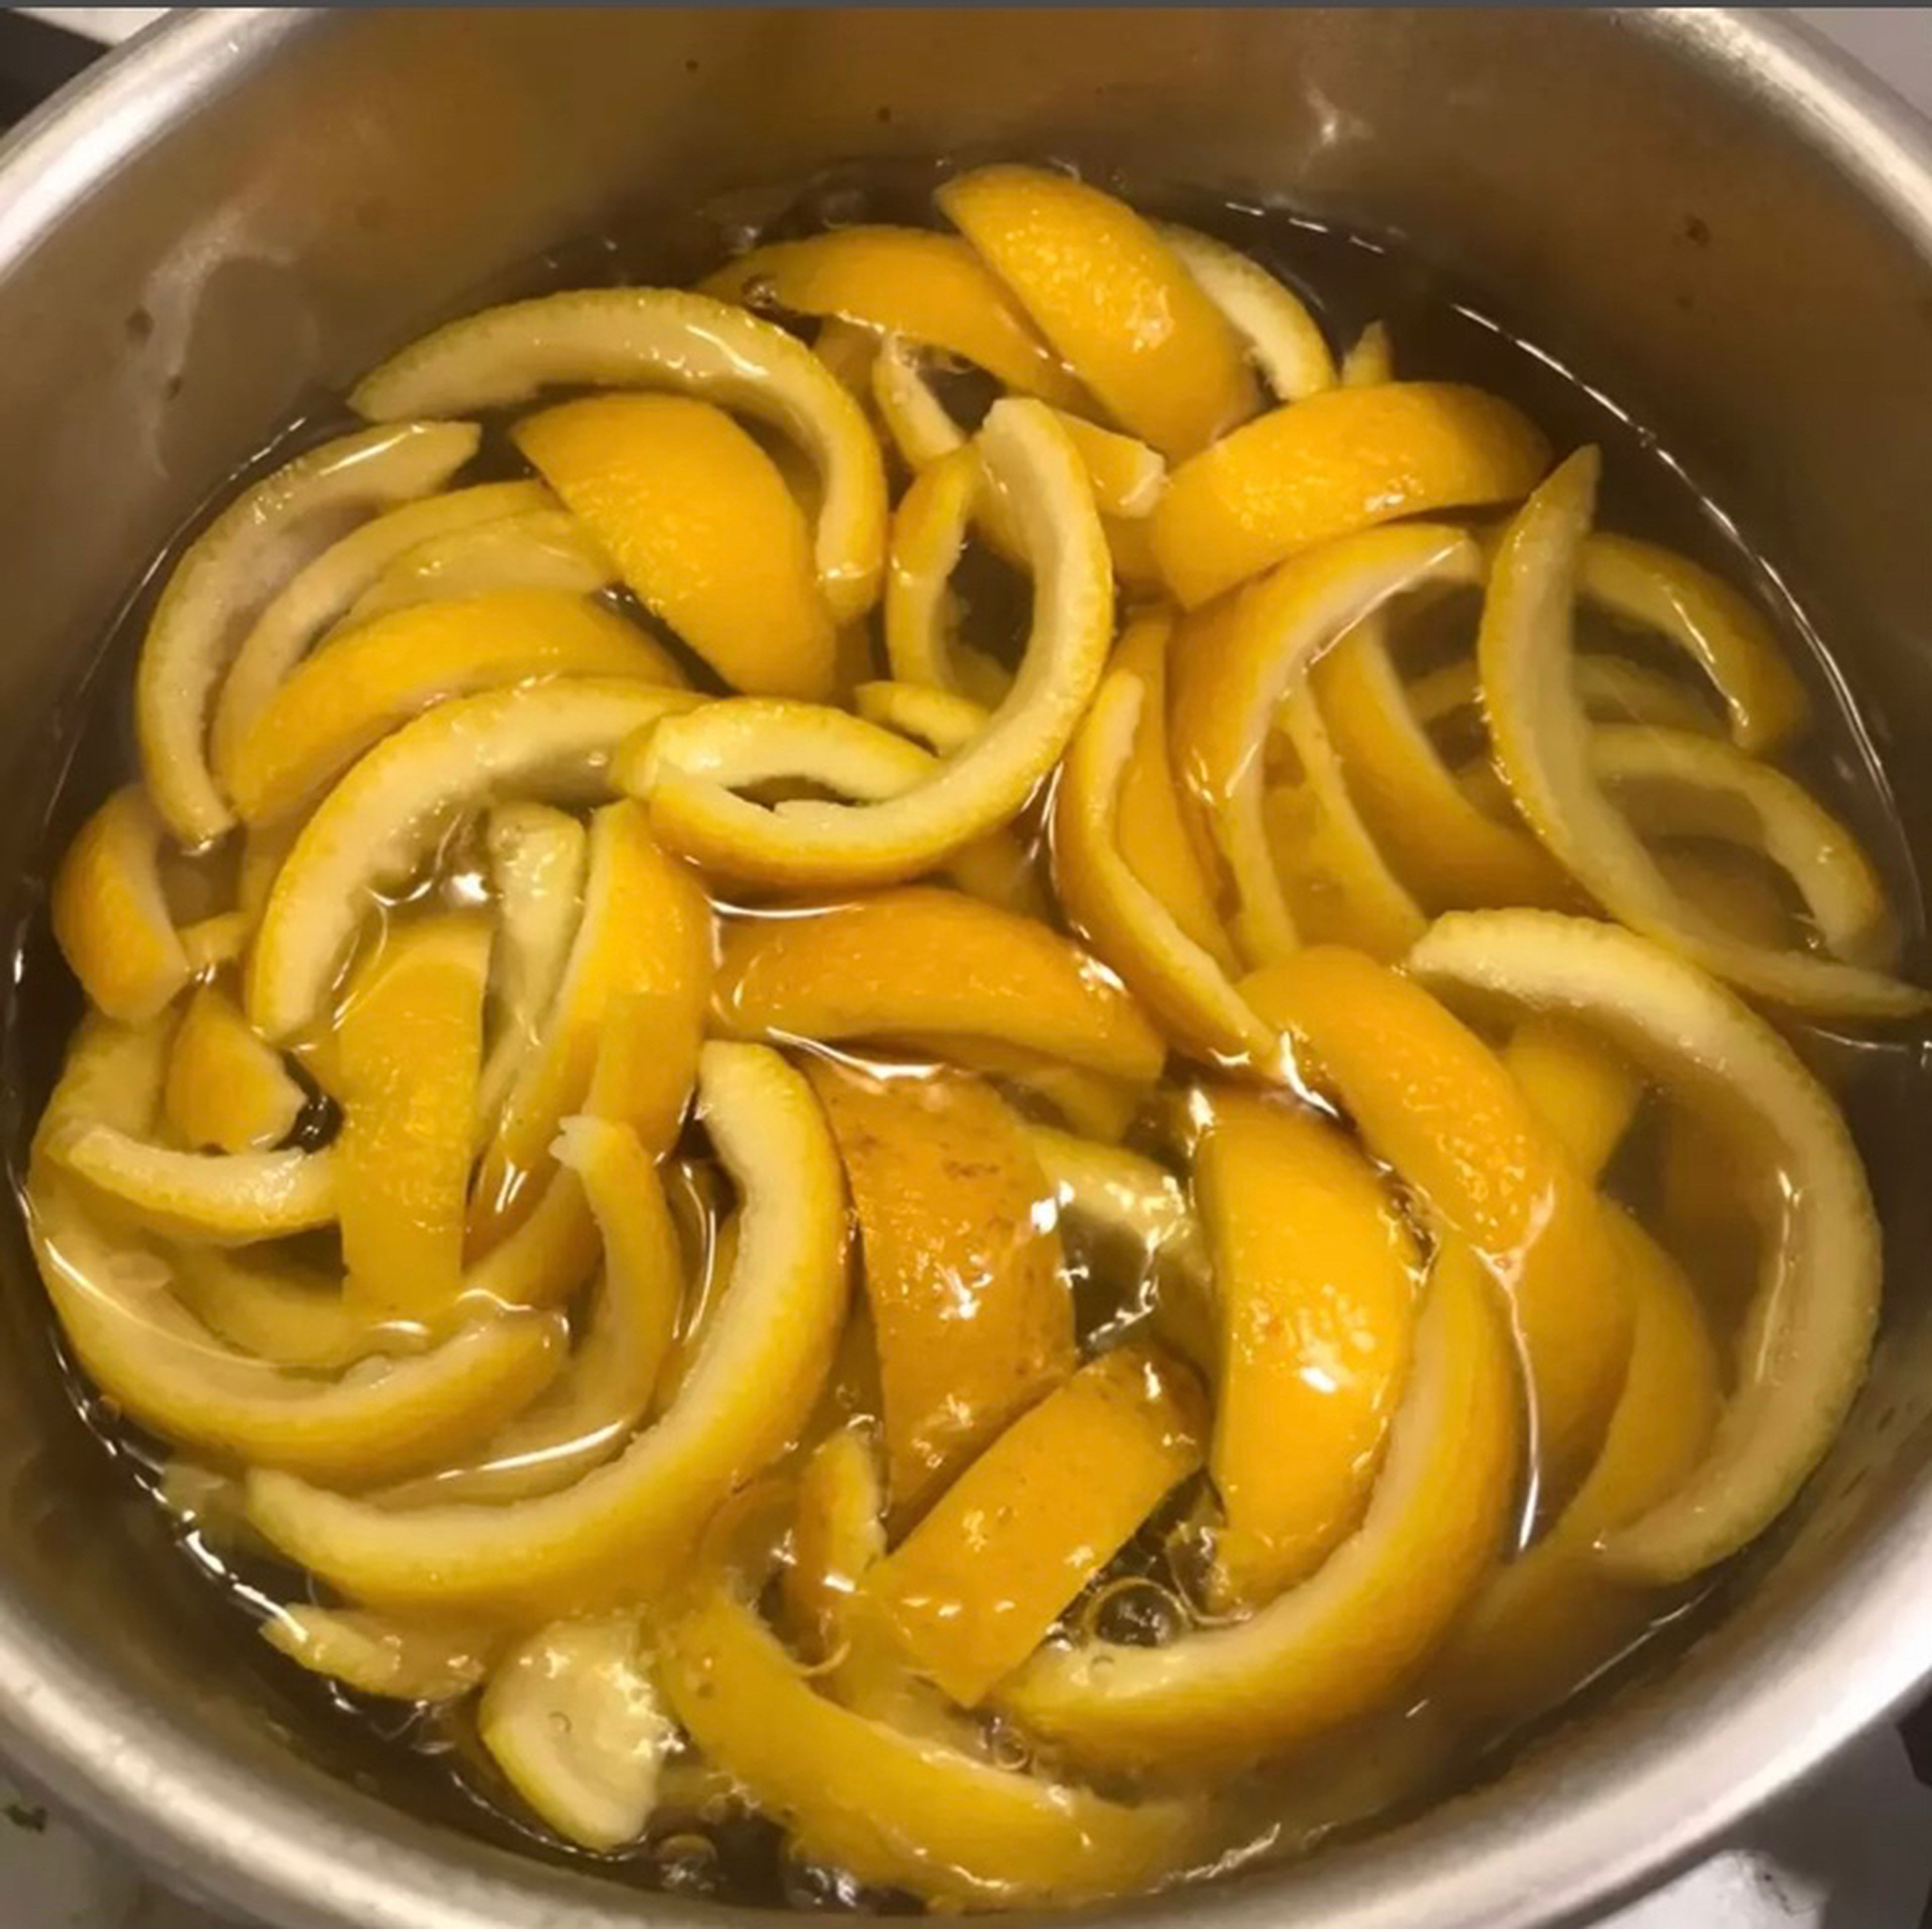 Pour the slices into a little saucepan and pour 250ml cold water over it and put it on a medium flame until it boils. Then drain it and return it to the pot, pour cold water again and let it boil. Do this up to three times to remove the bitterness of the orange peel.